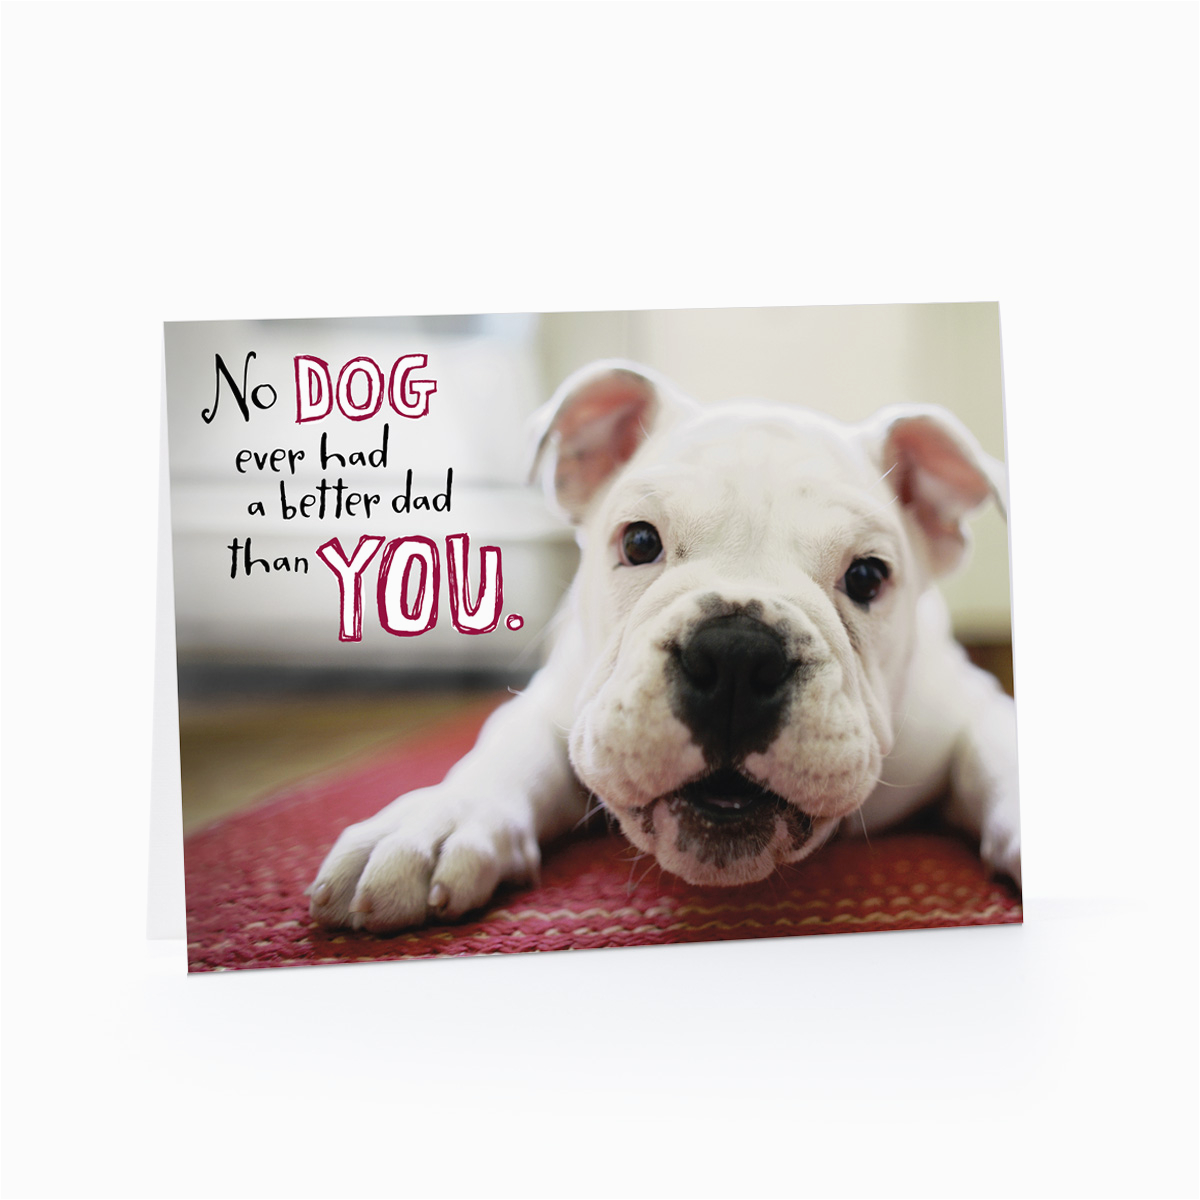 happy-birthday-with-dogs-images-free-dog-ecards-free-printable-happy-birthday-card-for-you